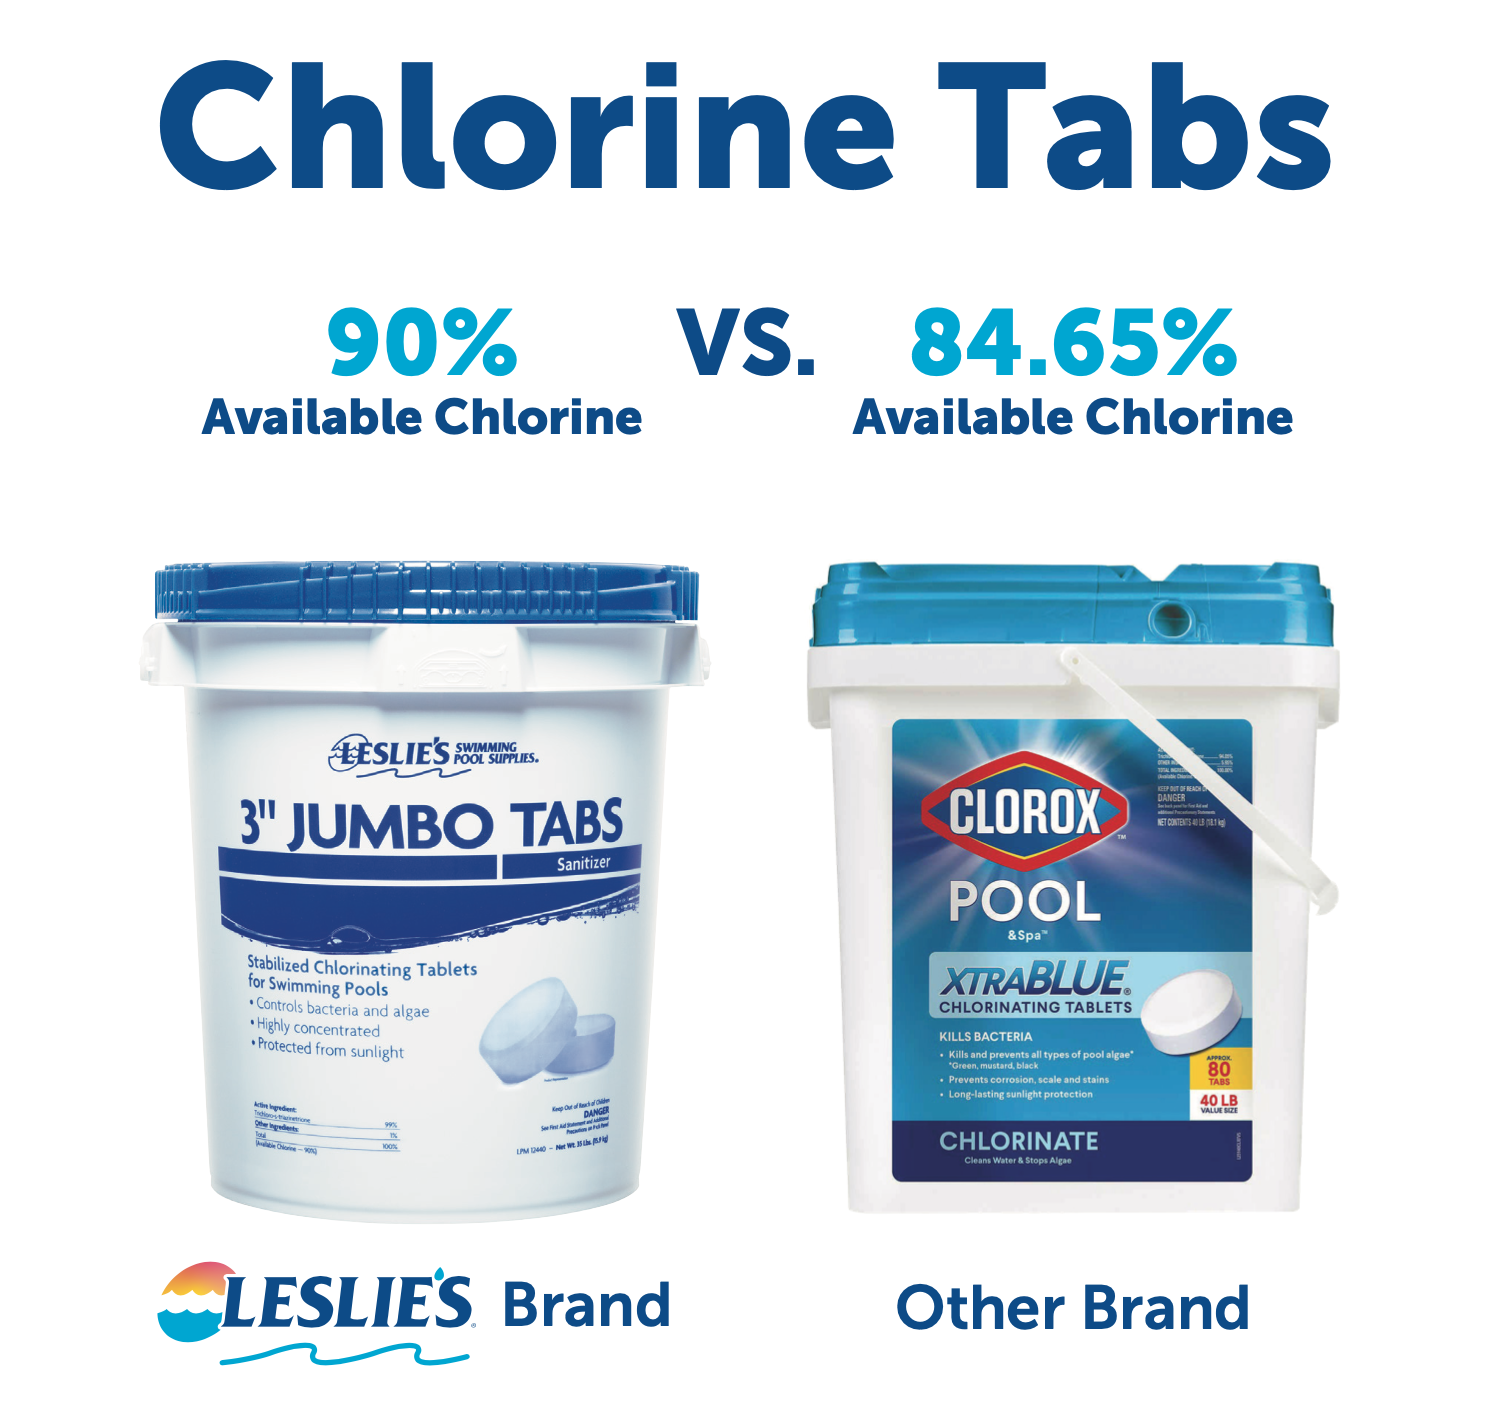 Leslie's 3" Jumbo Tabs are the best daily sanitizer pool chemicals because they offer the highest available chlorine content